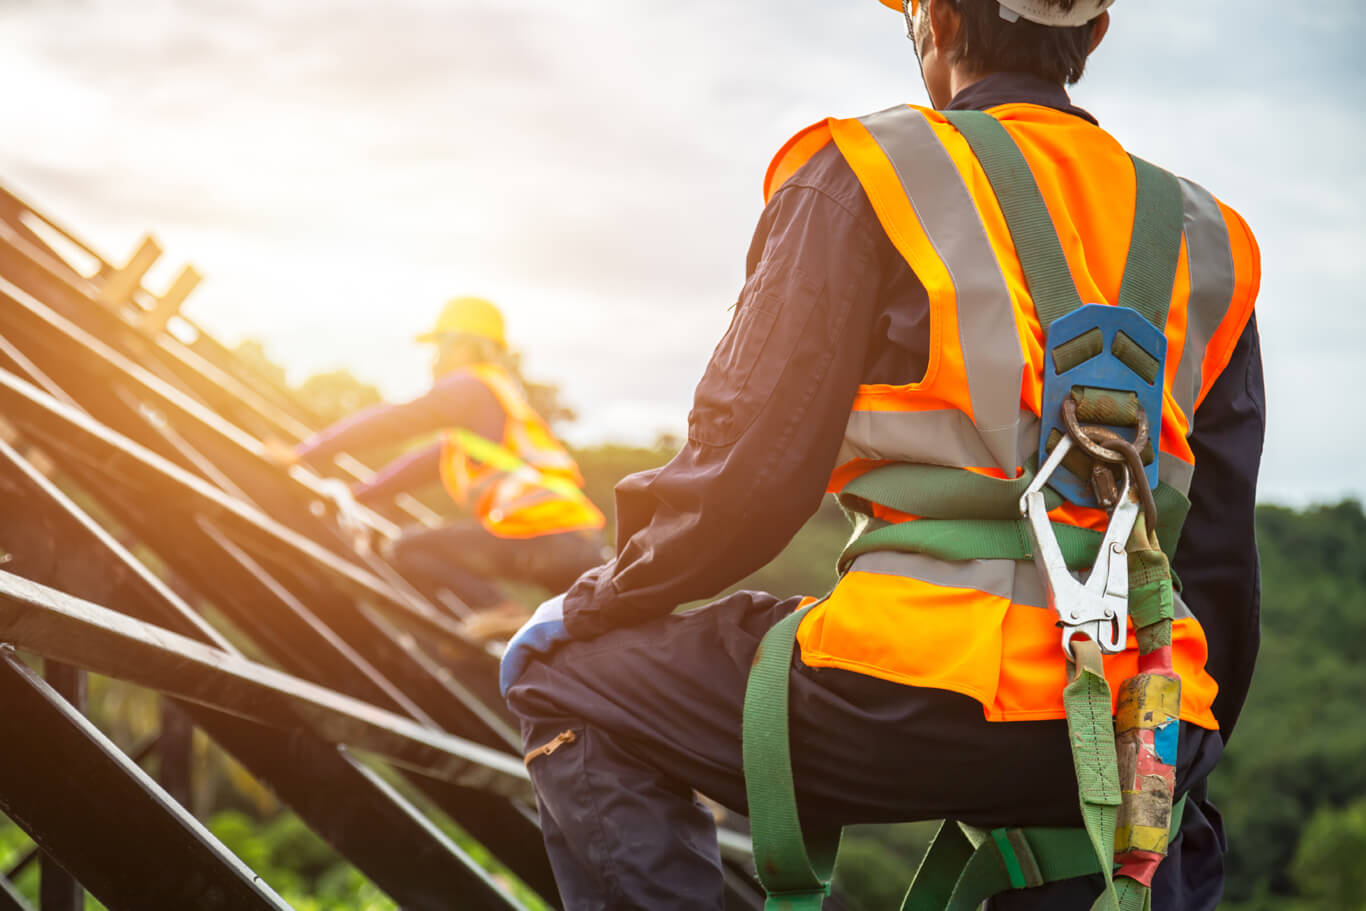 workers wear fall arrest systems per scaffolding safety guidelines